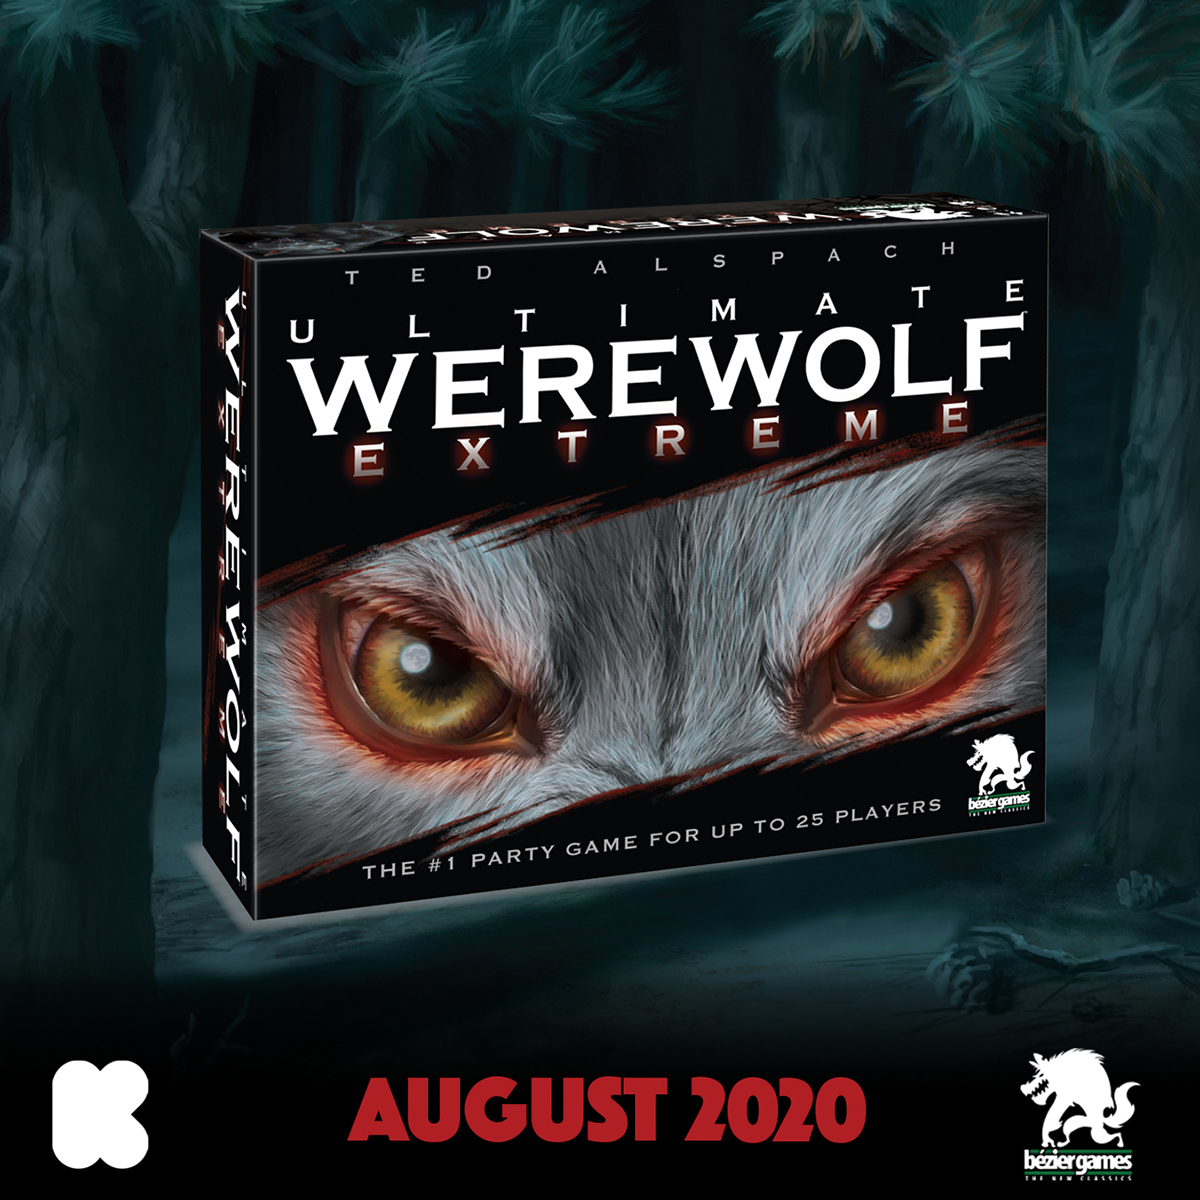 The Werewolf is Out of the Bag, and On the Loose!